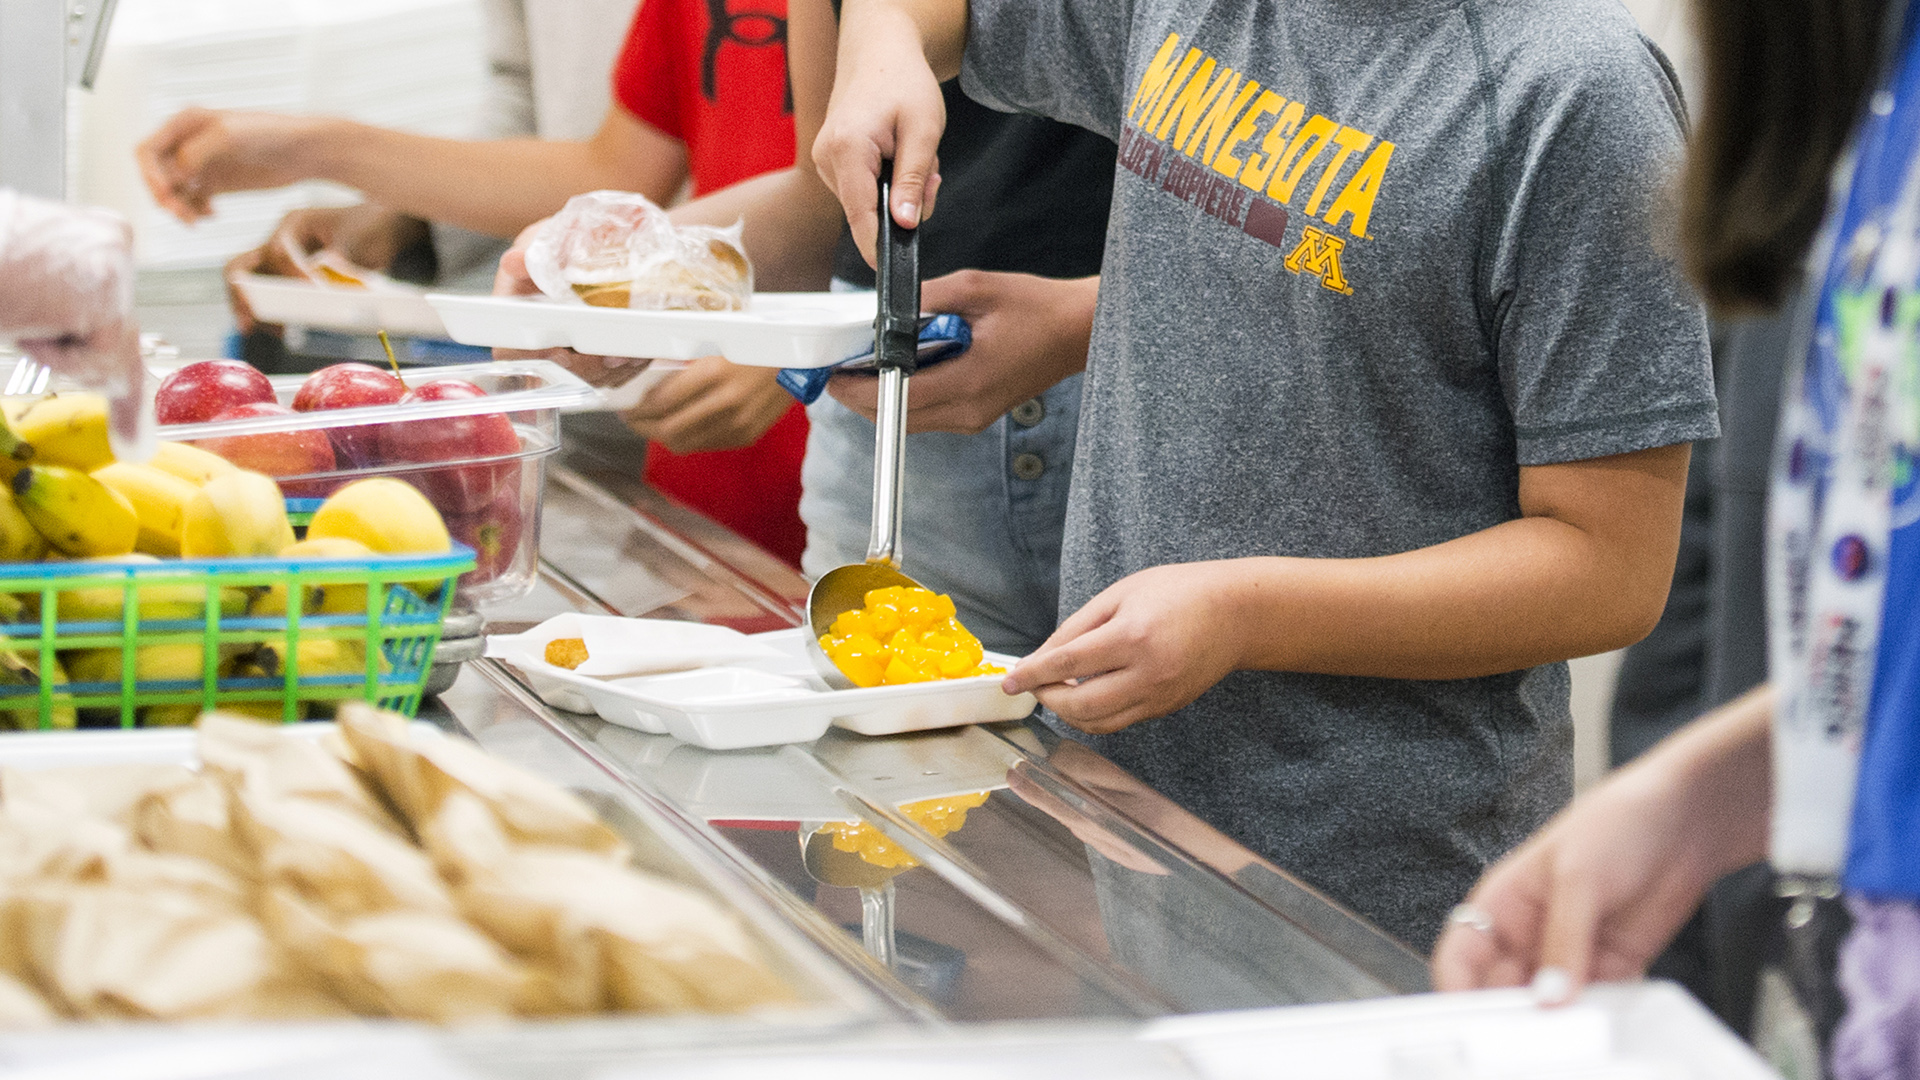 School lunches exposed: The good, the bad and the inedible